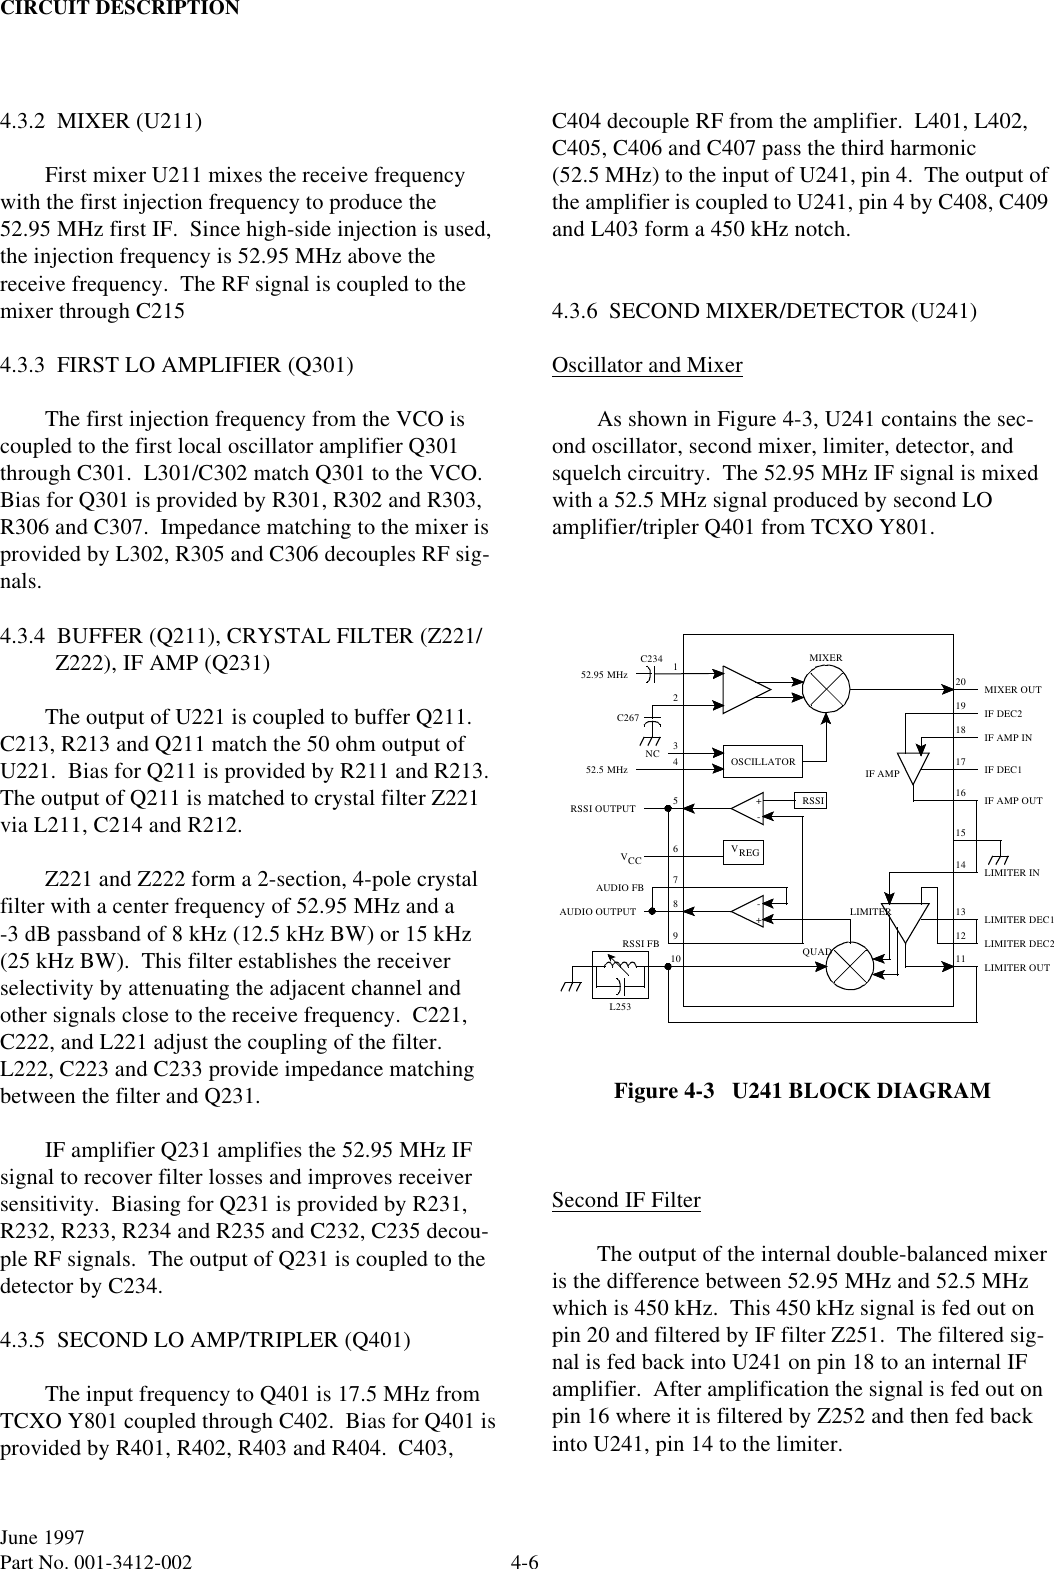 CIRCUIT DESCRIPTION4-6June 1997Part No. 001-3412-002 4.3.2  MIXER (U211)First mixer U211 mixes the receive frequency with the first injection frequency to produce the 52.95 MHz first IF.  Since high-side injection is used, the injection frequency is 52.95 MHz above the receive frequency.  The RF signal is coupled to the mixer through C2154.3.3  FIRST LO AMPLIFIER (Q301)The first injection frequency from the VCO is coupled to the first local oscillator amplifier Q301 through C301.  L301/C302 match Q301 to the VCO.  Bias for Q301 is provided by R301, R302 and R303, R306 and C307.  Impedance matching to the mixer is provided by L302, R305 and C306 decouples RF sig-nals.4.3.4  BUFFER (Q211), CRYSTAL FILTER (Z221/Z222), IF AMP (Q231)The output of U221 is coupled to buffer Q211.  C213, R213 and Q211 match the 50 ohm output of U221.  Bias for Q211 is provided by R211 and R213.  The output of Q211 is matched to crystal filter Z221 via L211, C214 and R212.Z221 and Z222 form a 2-section, 4-pole crystal filter with a center frequency of 52.95 MHz and a -3 dB passband of 8 kHz (12.5 kHz BW) or 15 kHz (25 kHz BW).  This filter establishes the receiver selectivity by attenuating the adjacent channel and other signals close to the receive frequency.  C221, C222, and L221 adjust the coupling of the filter.  L222, C223 and C233 provide impedance matching between the filter and Q231.IF amplifier Q231 amplifies the 52.95 MHz IF signal to recover filter losses and improves receiver sensitivity.  Biasing for Q231 is provided by R231, R232, R233, R234 and R235 and C232, C235 decou-ple RF signals.  The output of Q231 is coupled to the detector by C234.4.3.5  SECOND LO AMP/TRIPLER (Q401)The input frequency to Q401 is 17.5 MHz from TCXO Y801 coupled through C402.  Bias for Q401 is provided by R401, R402, R403 and R404.  C403, C404 decouple RF from the amplifier.  L401, L402, C405, C406 and C407 pass the third harmonic (52.5 MHz) to the input of U241, pin 4.  The output of the amplifier is coupled to U241, pin 4 by C408, C409 and L403 form a 450 kHz notch.4.3.6  SECOND MIXER/DETECTOR (U241)Oscillator and MixerAs shown in Figure 4-3, U241 contains the sec-ond oscillator, second mixer, limiter, detector, and squelch circuitry.  The 52.95 MHz IF signal is mixed with a 52.5 MHz signal produced by second LO amplifier/tripler Q401 from TCXO Y801.Figure 4-3   U241 BLOCK DIAGRAMSecond IF FilterThe output of the internal double-balanced mixer is the difference between 52.95 MHz and 52.5 MHz which is 450 kHz.  This 450 kHz signal is fed out on pin 20 and filtered by IF filter Z251.  The filtered sig-nal is fed back into U241 on pin 18 to an internal IF amplifier.  After amplification the signal is fed out on pin 16 where it is filtered by Z252 and then fed back into U241, pin 14 to the limiter.124MIXER5151411RSSI52.95 MHzC234C26720OSCILLATOR52.5 MHz+-RSSI OUTPUT9VREG6VCC78+-10 QUADAUDIO OUTPUTL25312133NCLIMITER INLIMITERIF AMP OUTIF DEC1IF DEC2IF AMP INMIXER OUTLIMITER DEC1LIMITER DEC2LIMITER OUTIF AMP16171819RSSI FBAUDIO FB